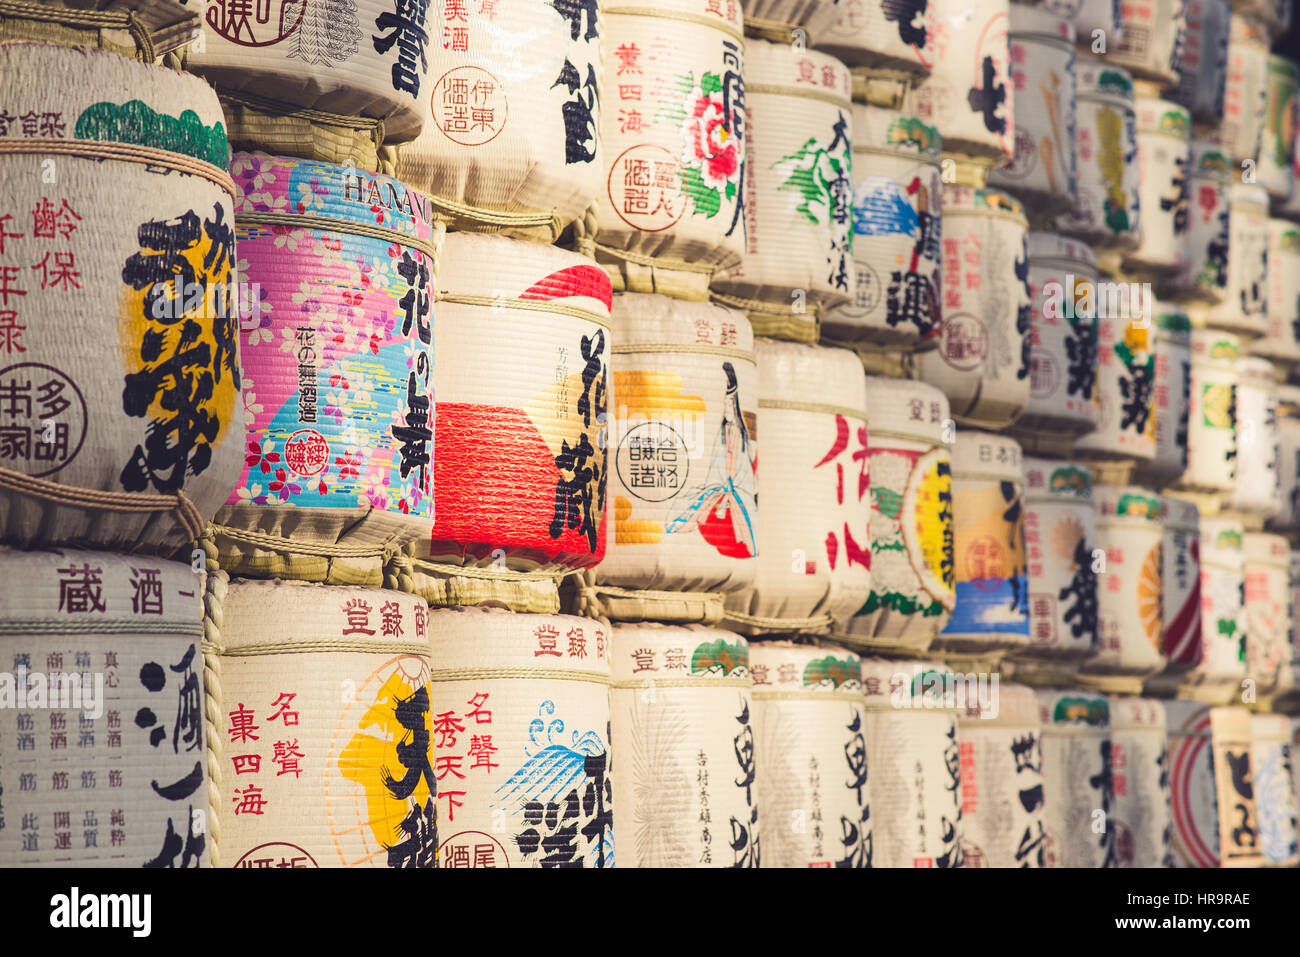 TOKYO, JAPAN - MARCH 30: A collection of Japanese sake barrels stacked is at the Japanese Meiji Shrine. Stock Photo